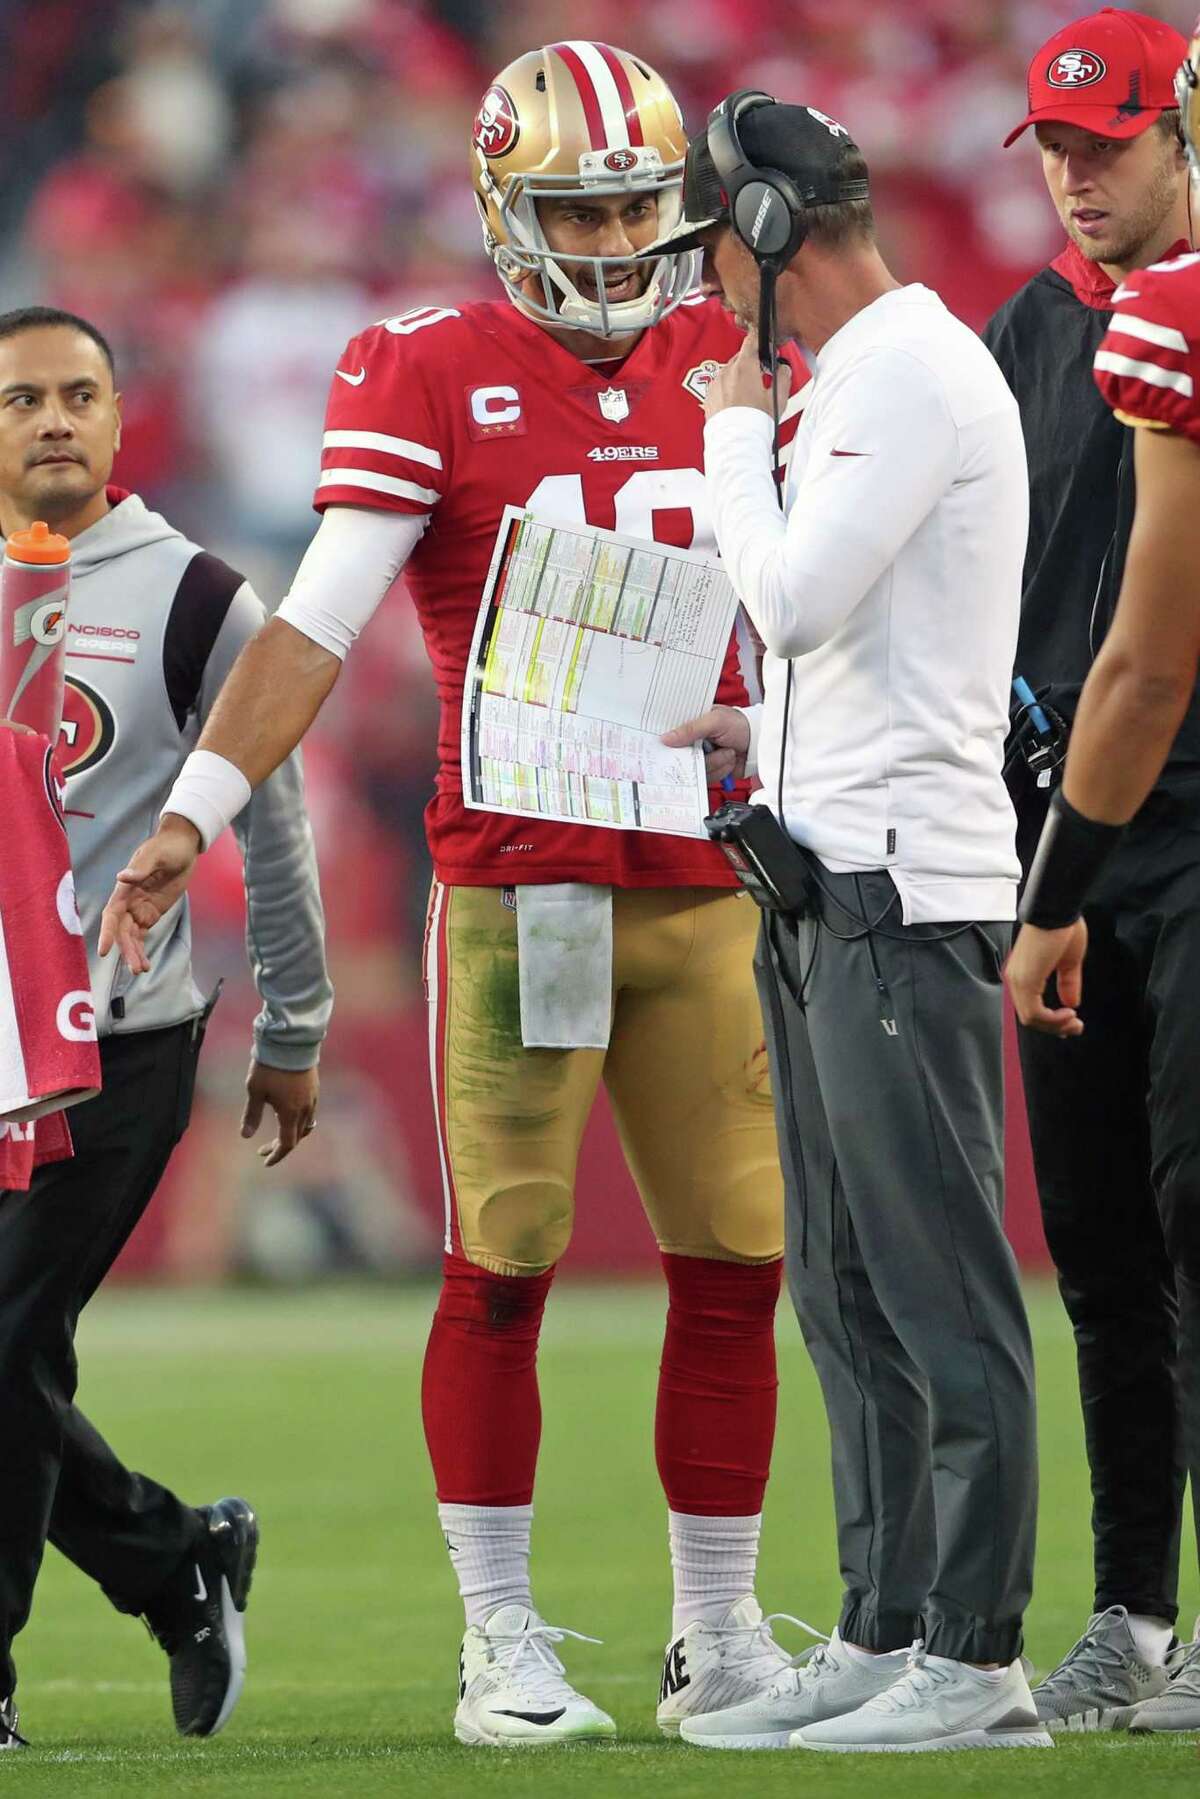 San Francisco 49ers' Jimmy Garoppolo confers with head coach Kyle Shanahan in 4th quarter of 34-26 win over Minnesota Vikings during NFL game at Levi's Stadium in Santa Clara, Calif., on Sunday, November 28, 2021.